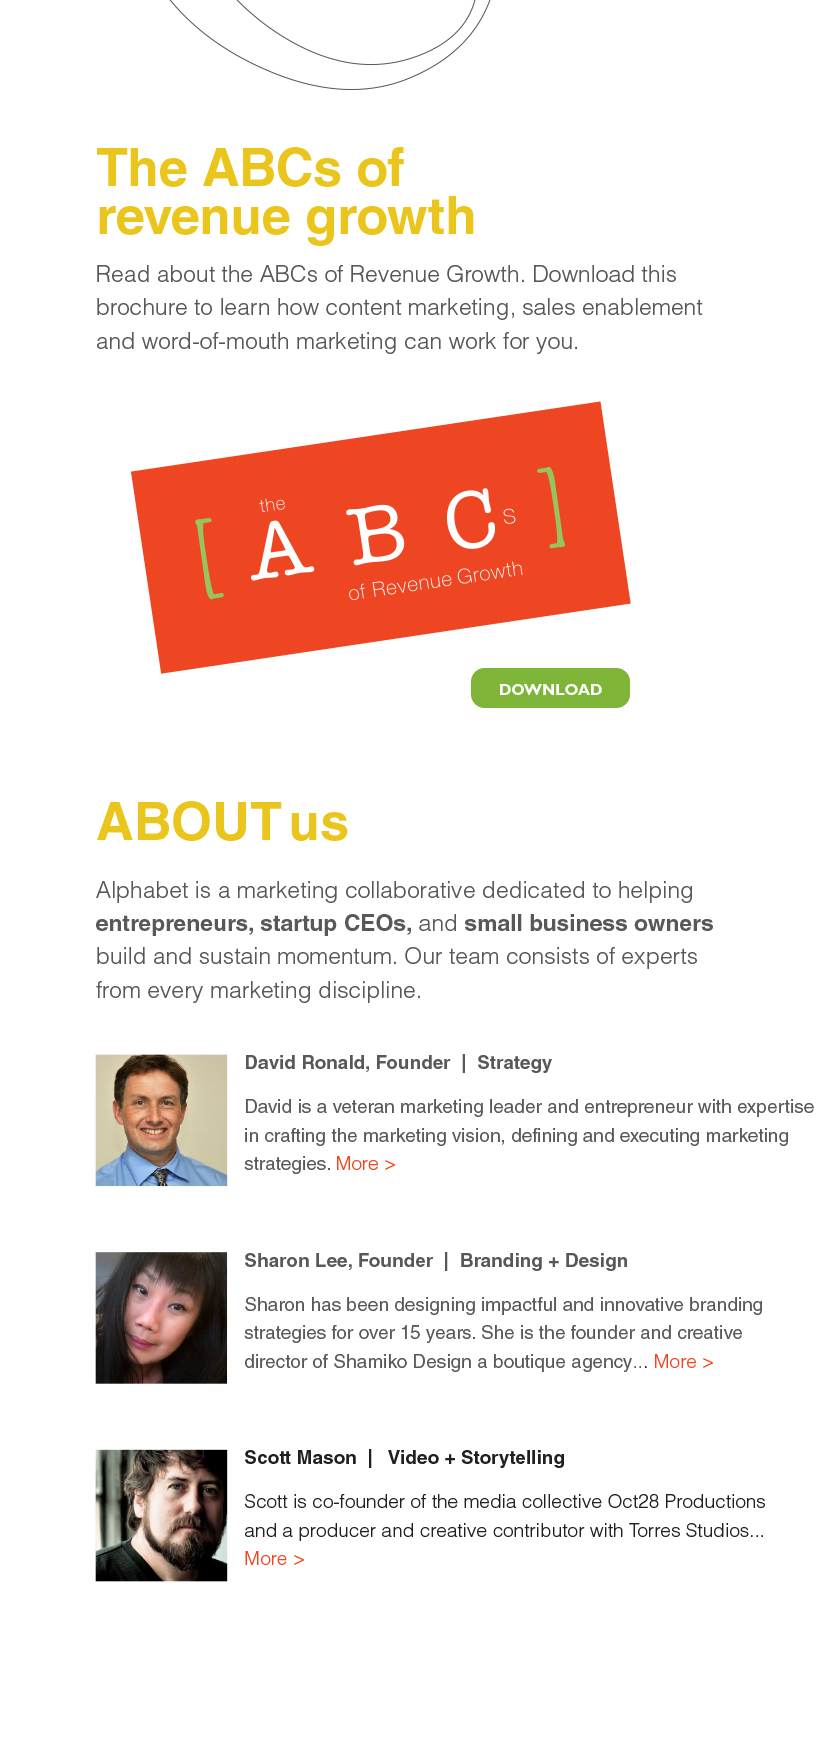 The ABCs of revenue growth Read about the ABCs of Revenue Growth. Download this brochure to learn how content marketing, sales enablement and word-of-mouth marketing can work for you. ABOUT us Alphabet is a marketing collaborative dedicated to helping entrepreneurs, startup CEOs, and small business owners
build and sustain momentum. Our team consists of experts from every marketing discipline. David Ronald, Founder | Strategy David is a veteran marketing leader and entrepreneur with expertise in crafting the marketing vision, defining and executing marketing strategies. More > Sharon Lee, Founder | Branding + Design Sharon has been designing imapctful and innovative branding strategies for over 15 years. She is the founder and creative director of Shamiko Design a boutique agency... More > Scott Mason | Video + Storytelling Scott is co-founder of the media collective Oct28 Productions and a producer and creative contributor with Torres Studios... More >